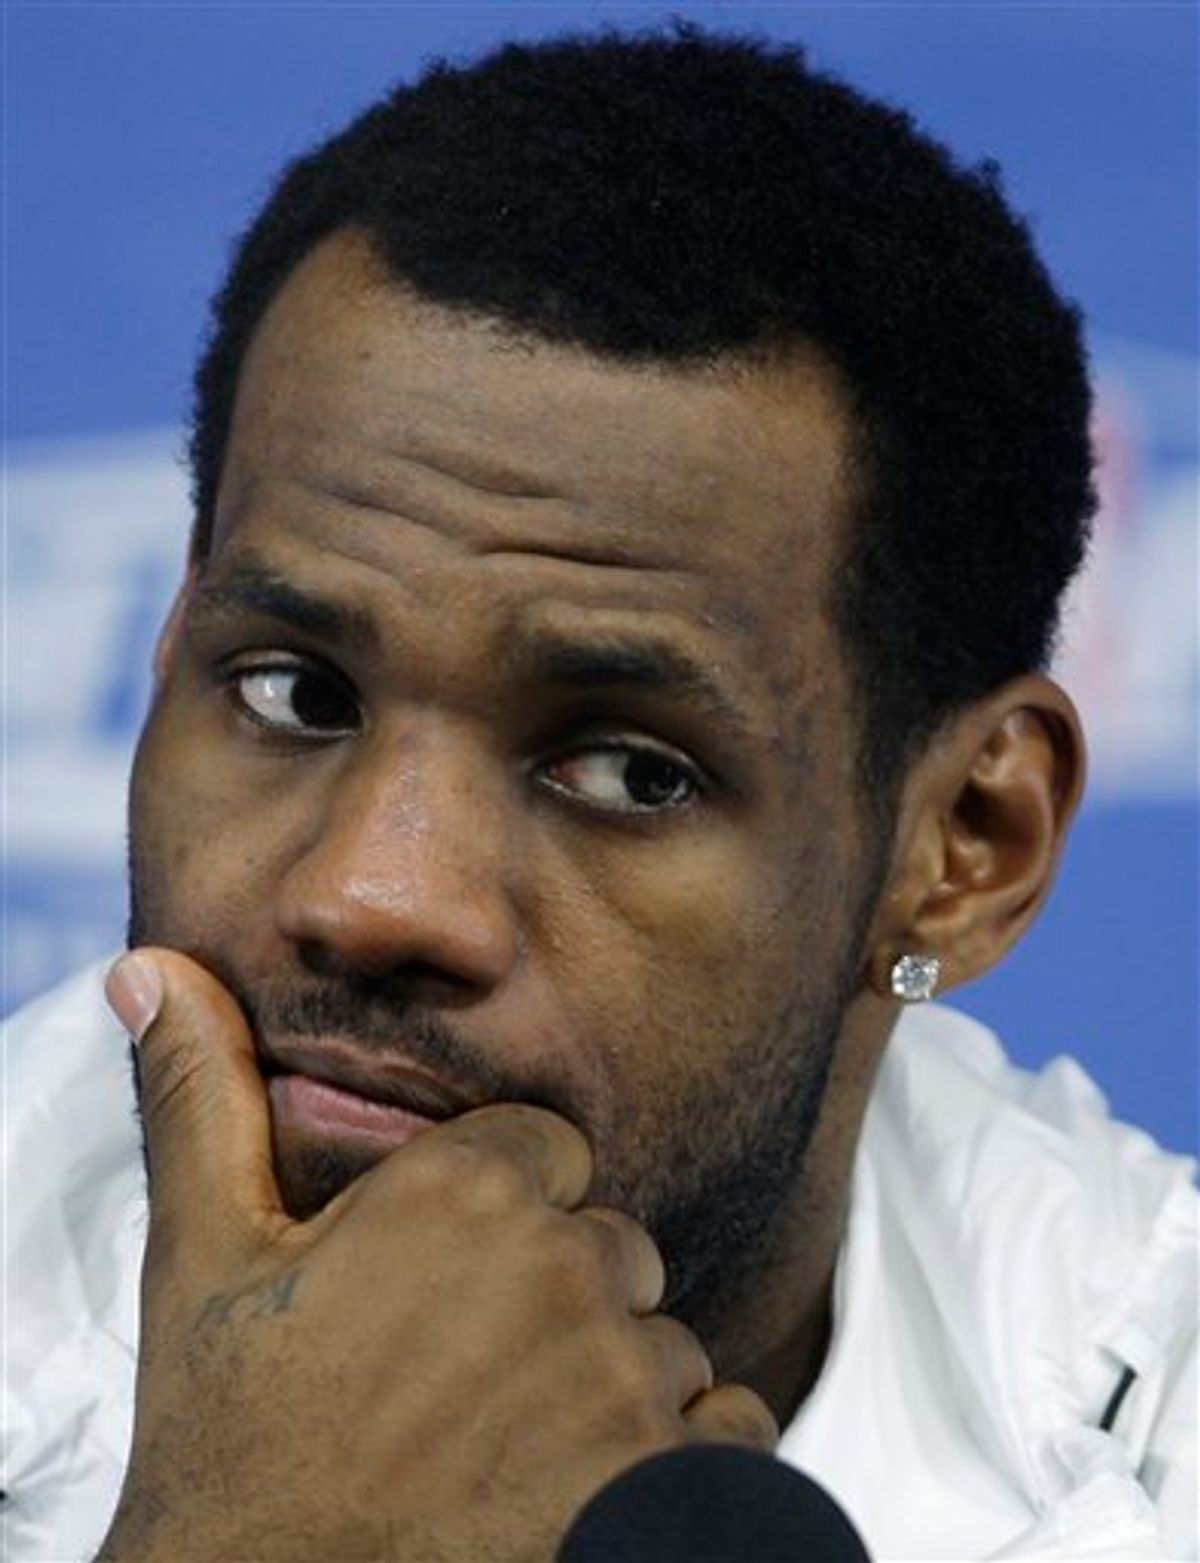 Cleveland Cavaliers forward LeBron James listens to a question during a news conference after losing 94-85 to the Boston Celtics in Game 6 of an NBA basketball second-round playoff series, Thursday, May 13, 2010, in Boston.  With no title again for Cleveland this year, James will have to decide if it's time to go look for it elsewhere.(AP Photo/Charles Krupa)    (AP)